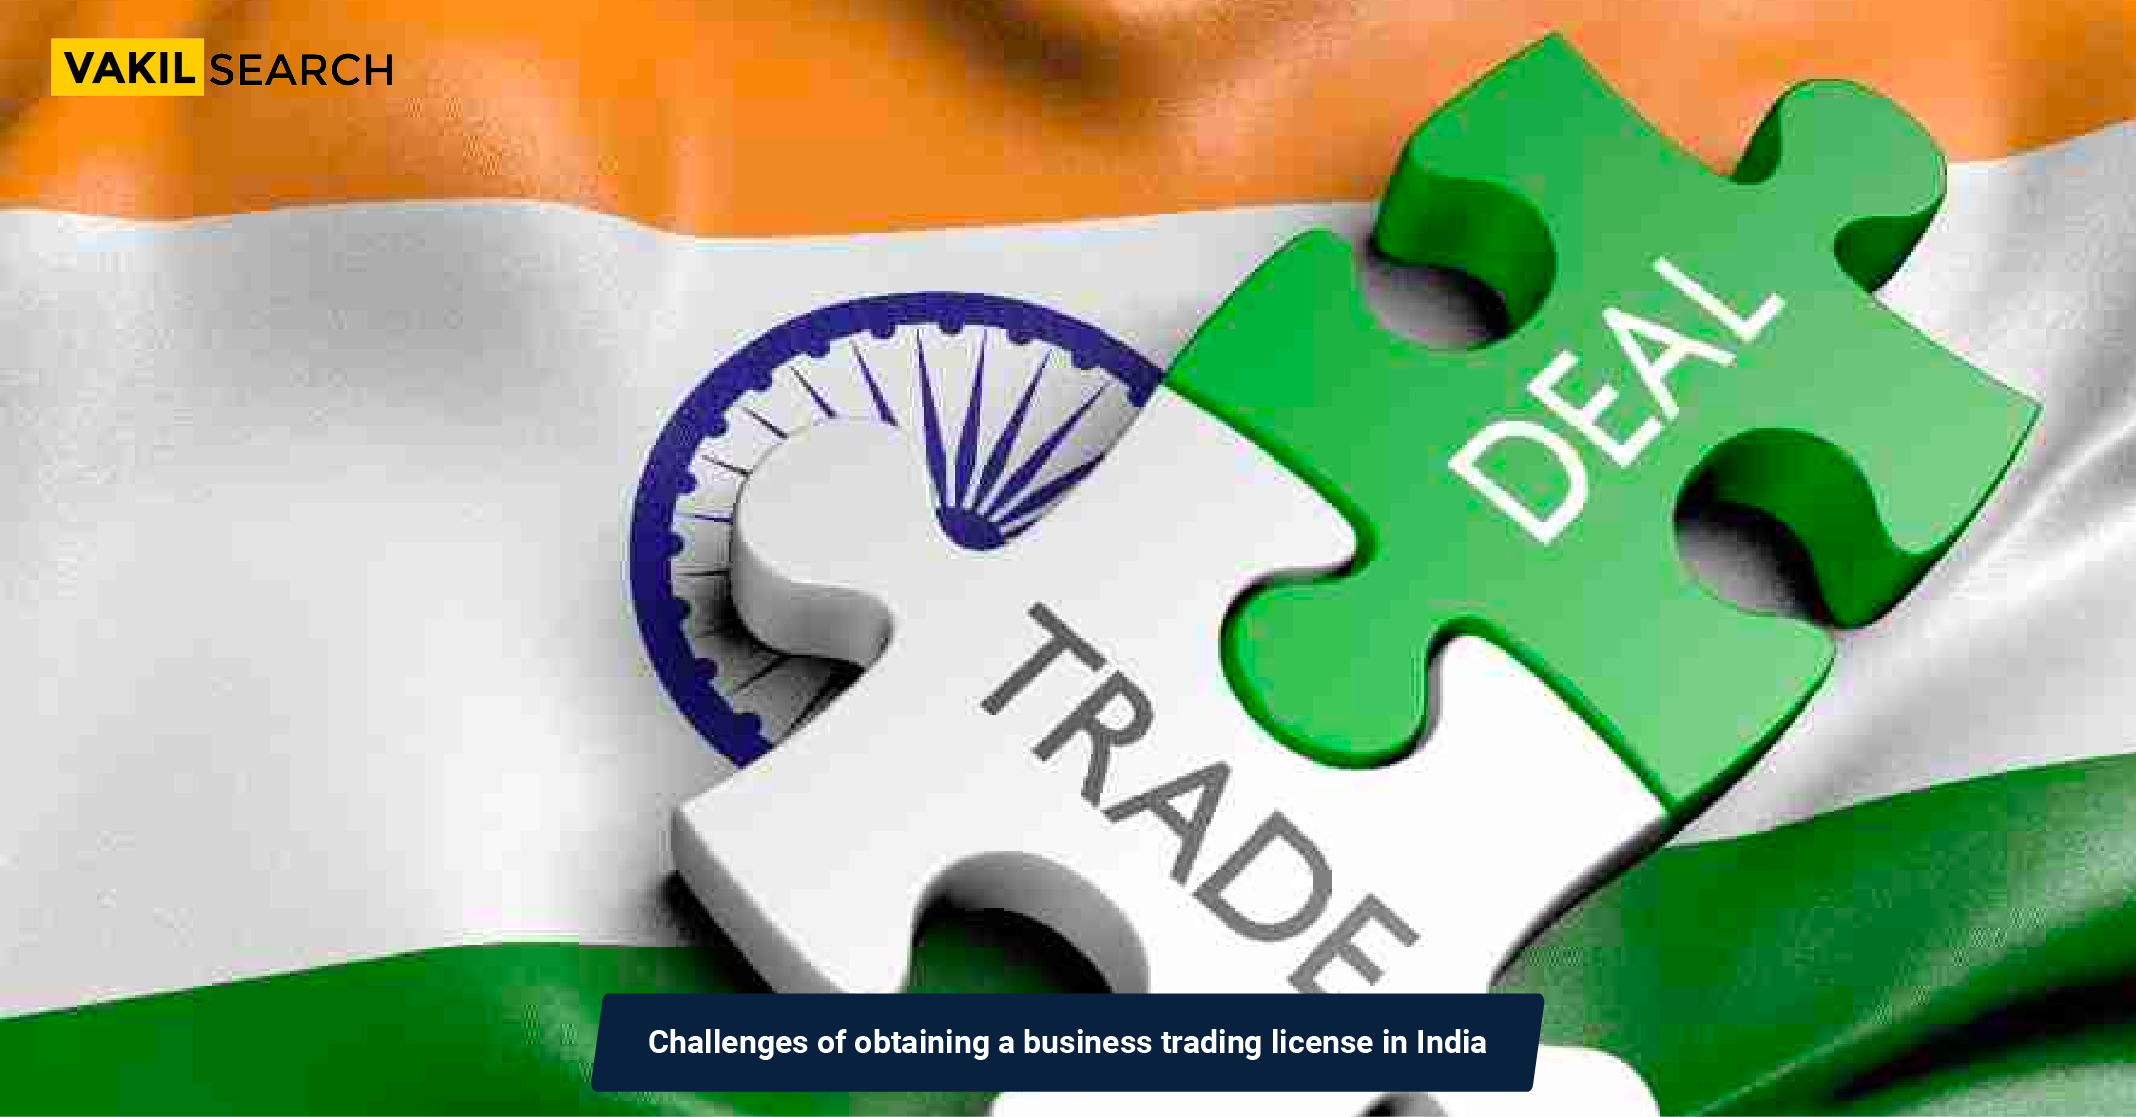 Challenges of obtaining a business trading license in India